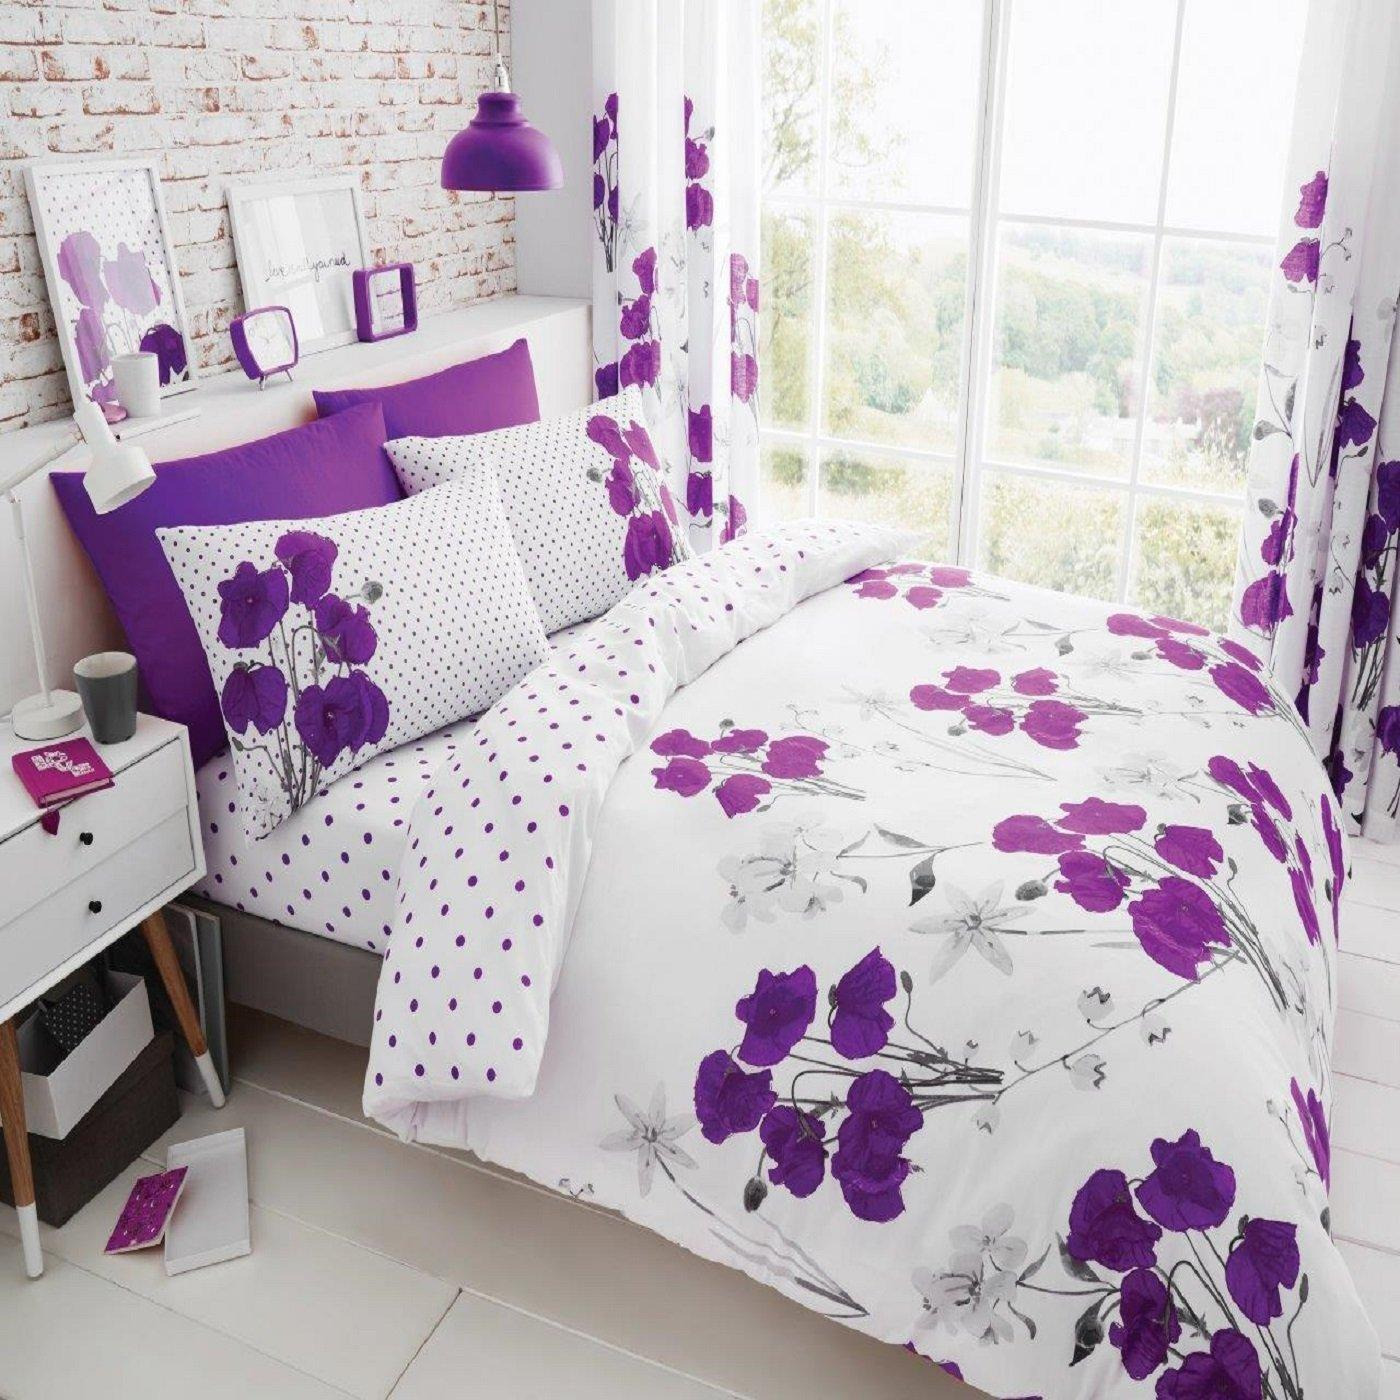 Printed Polycotton Poppy Duvet Cover With Pillowcases